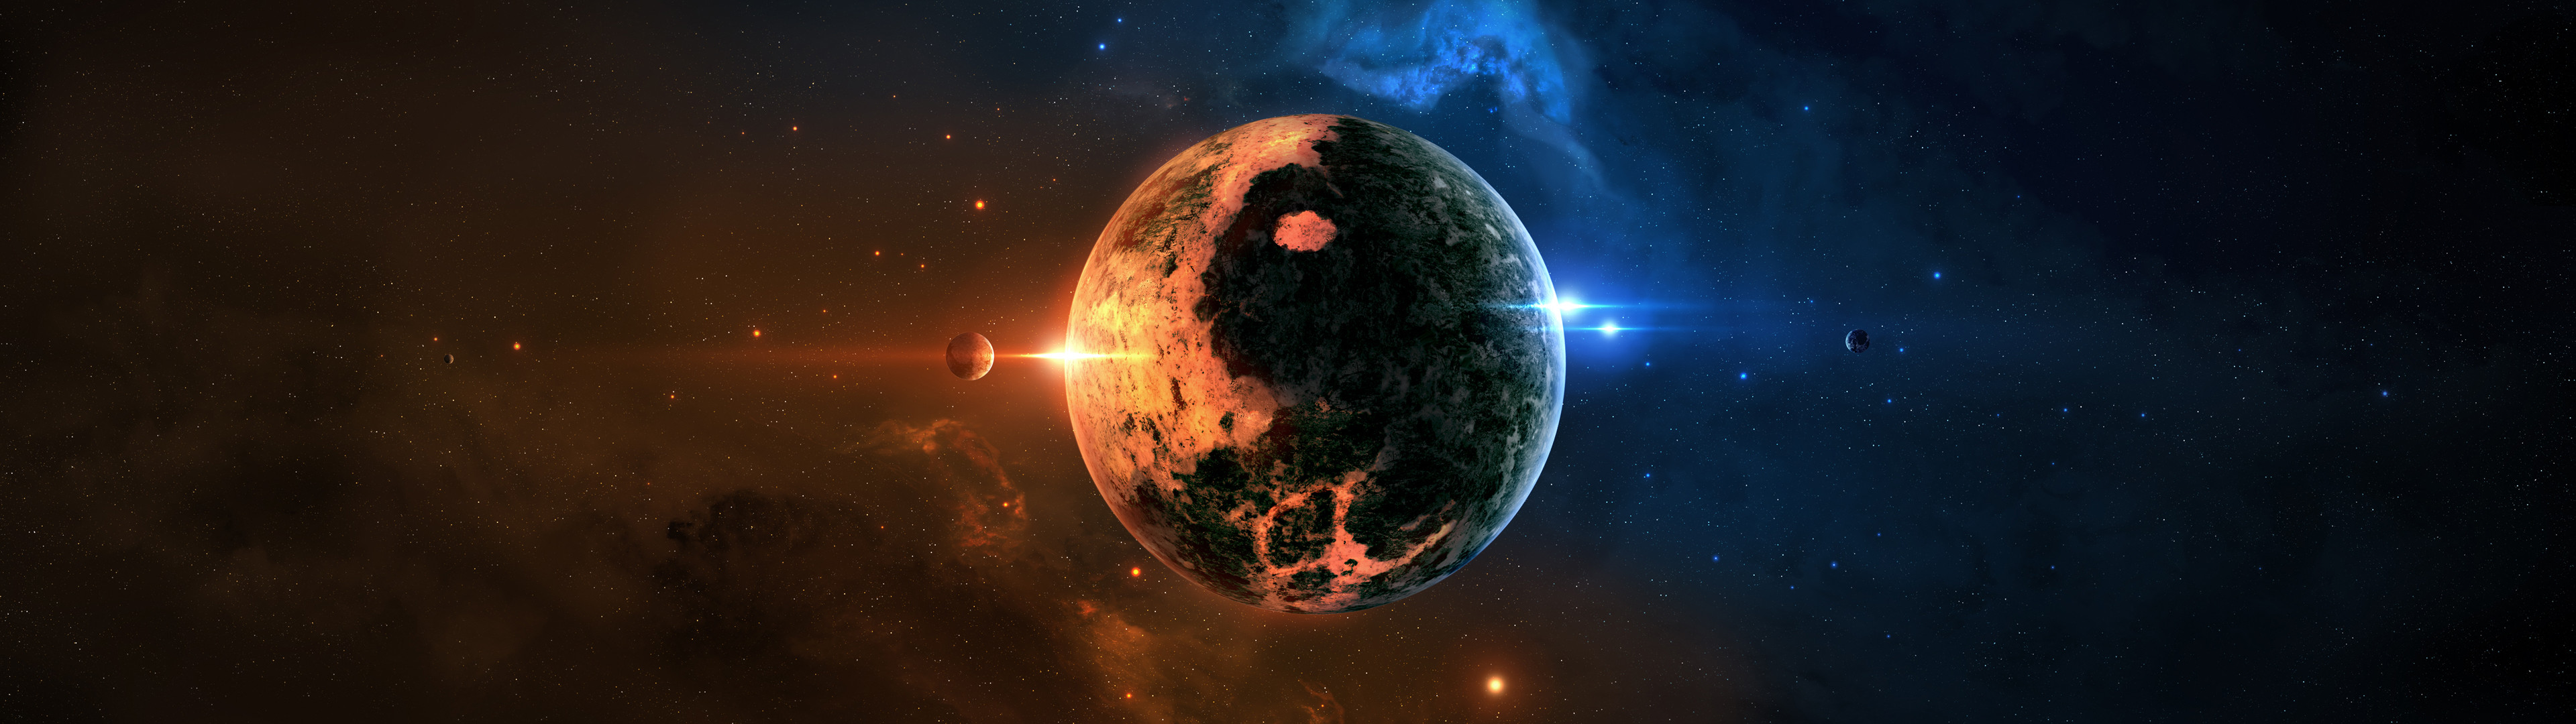 3840x1080 Planet In Outer Space, Dual Screen [] ...